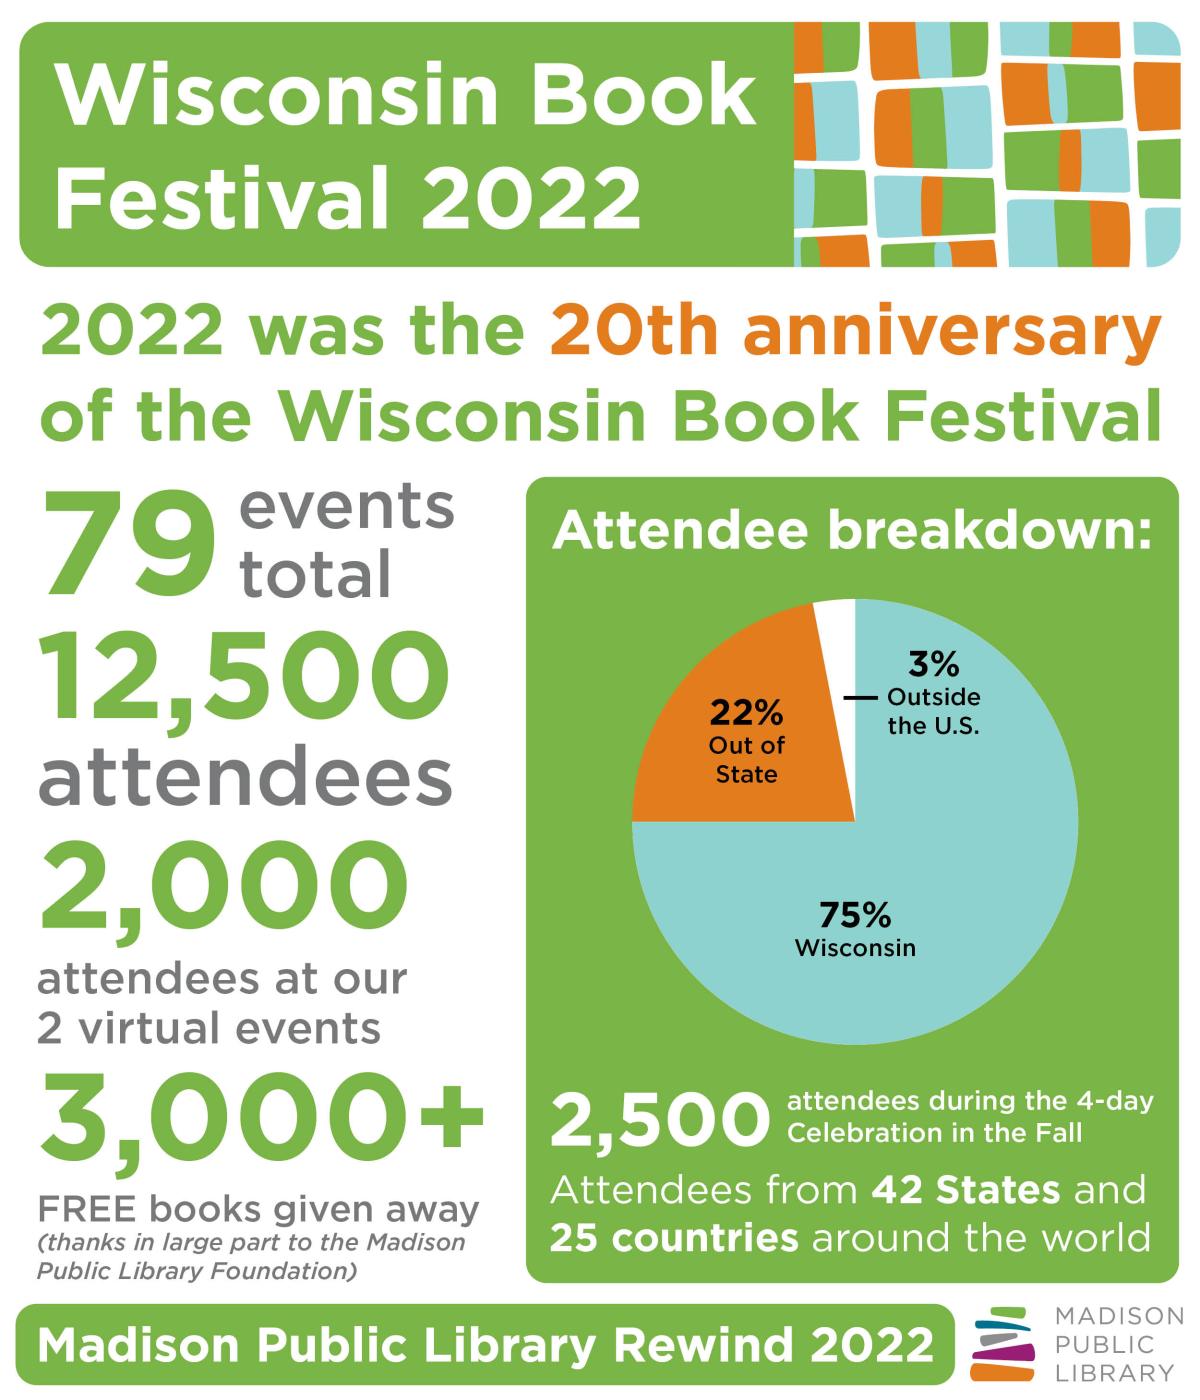 The Wisconsin Book Festival celebrated their 20th anniversary in 2022